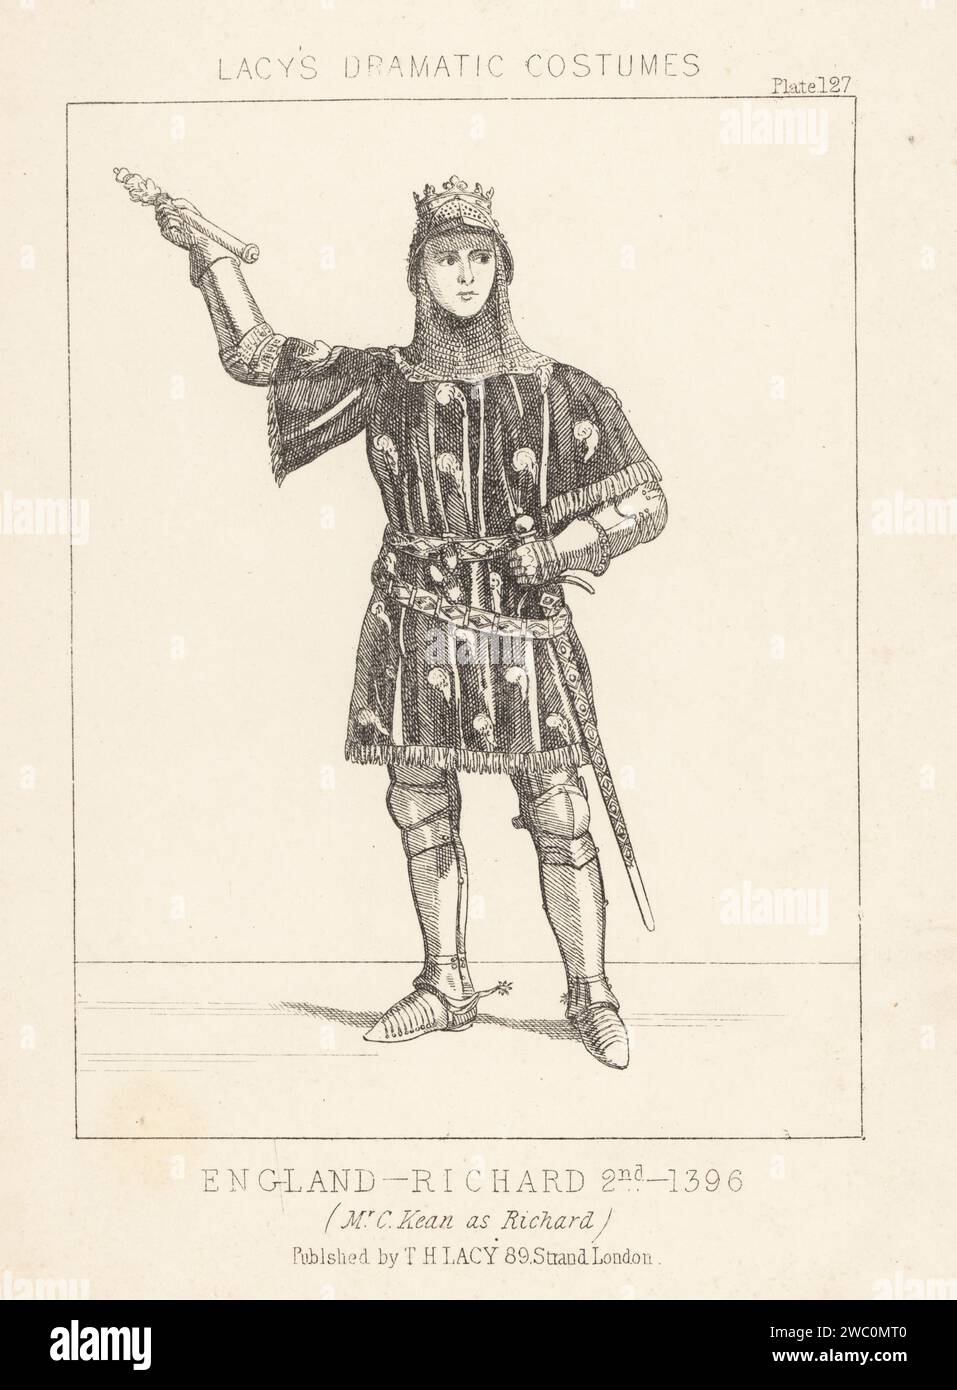 English actor Charles Kean as Richard II in William Shakespeare's history play, Princess Theatre, London, 1857. In crown over helmet and gorget, embroidered tunic, suit of armour, holding a sceptre and sword. Richard 2nd, 1396. Lithograph from Thomas Hailes Lacy's Male Costumes, Historical, National and Dramatic in 200 Plates, London, 1865. Lacy (1809-1873) was a British actor, playwright, theatrical manager and publisher. Stock Photo